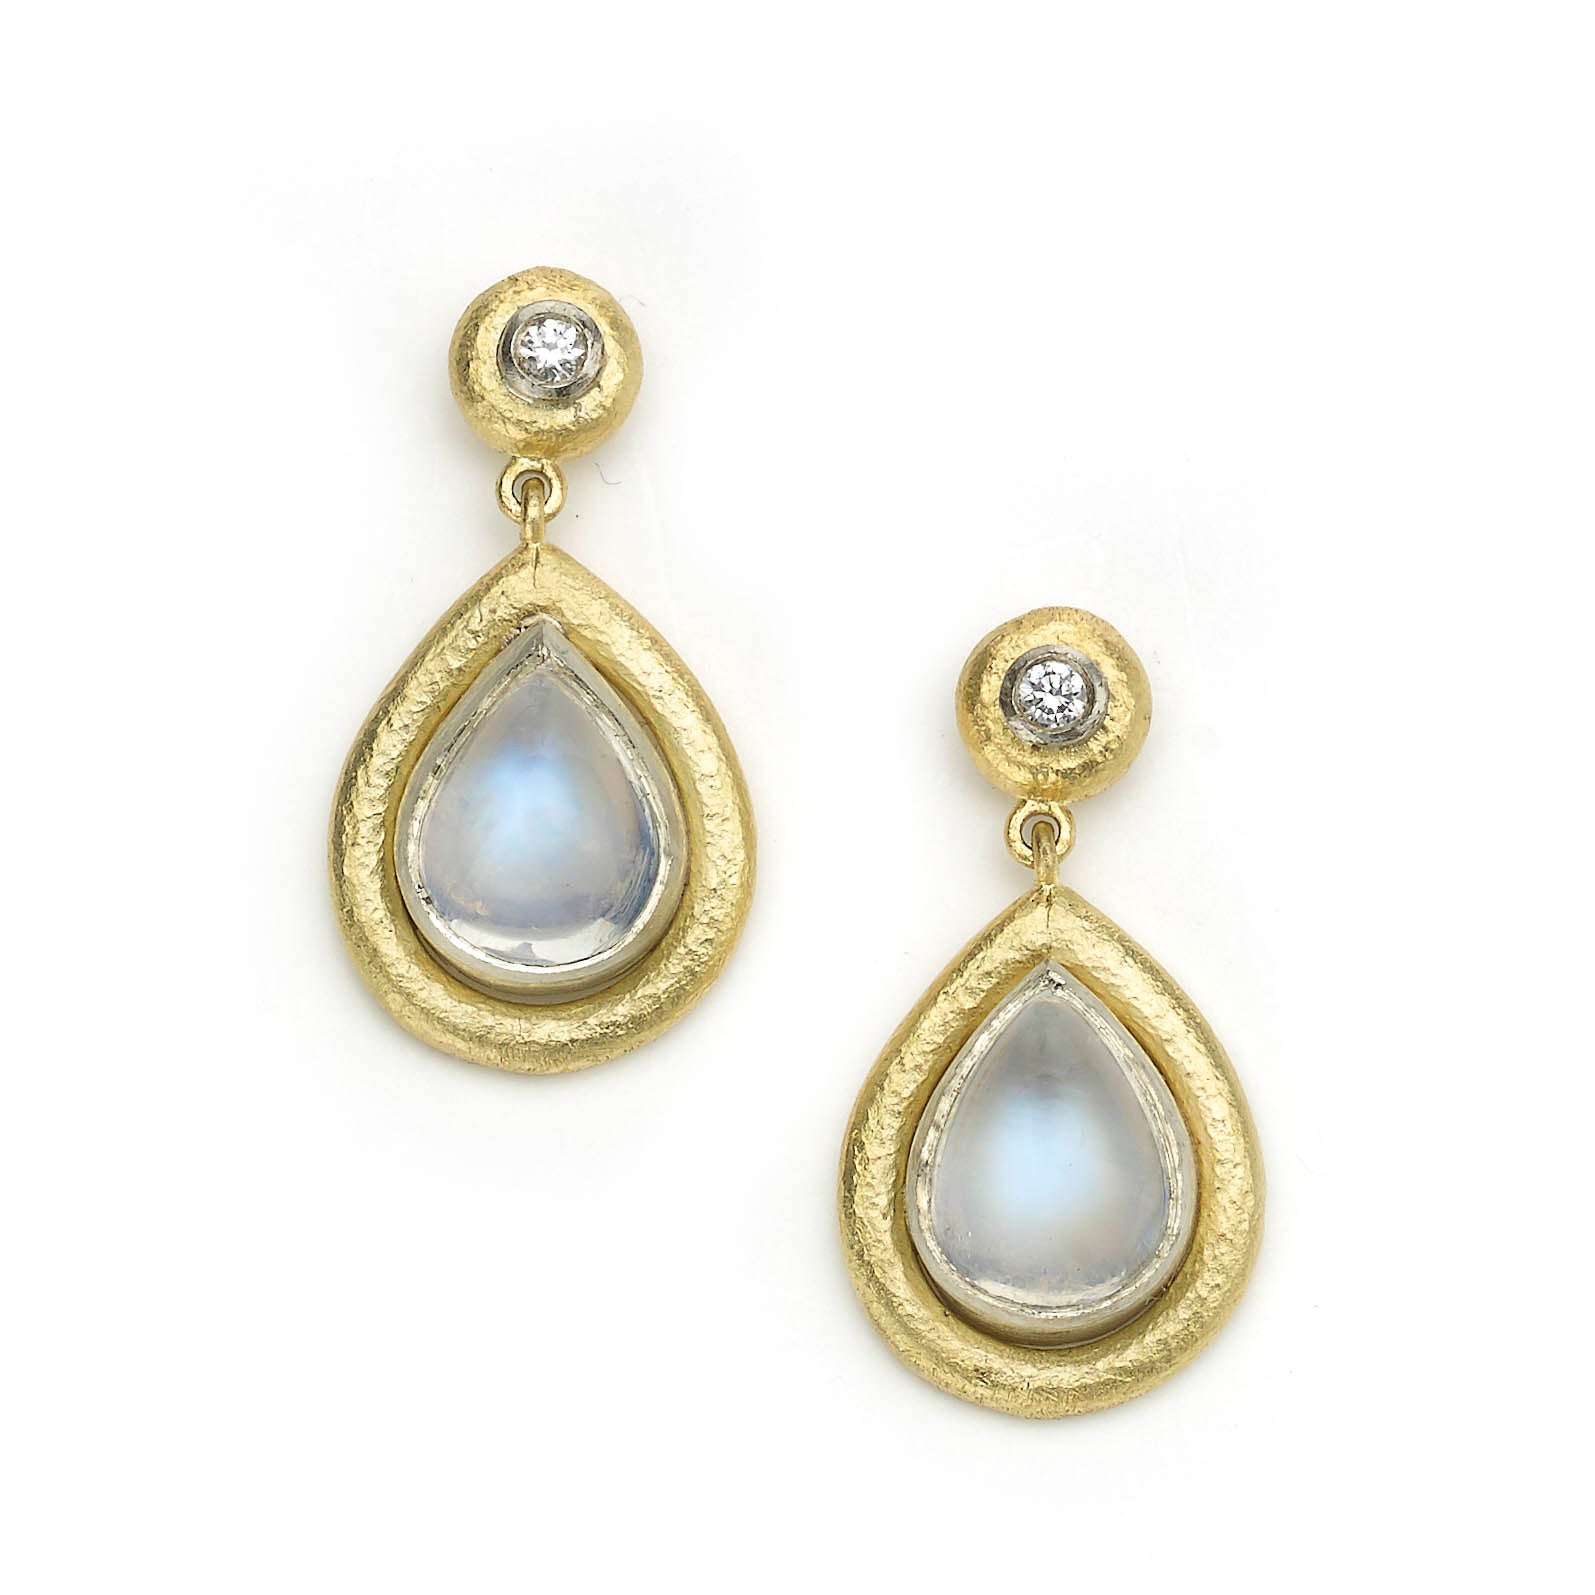 Drop earrings with pear shaped moonstone drops set in white gold with wide hammered texture yellow gold borders, round diamonds are set the same above